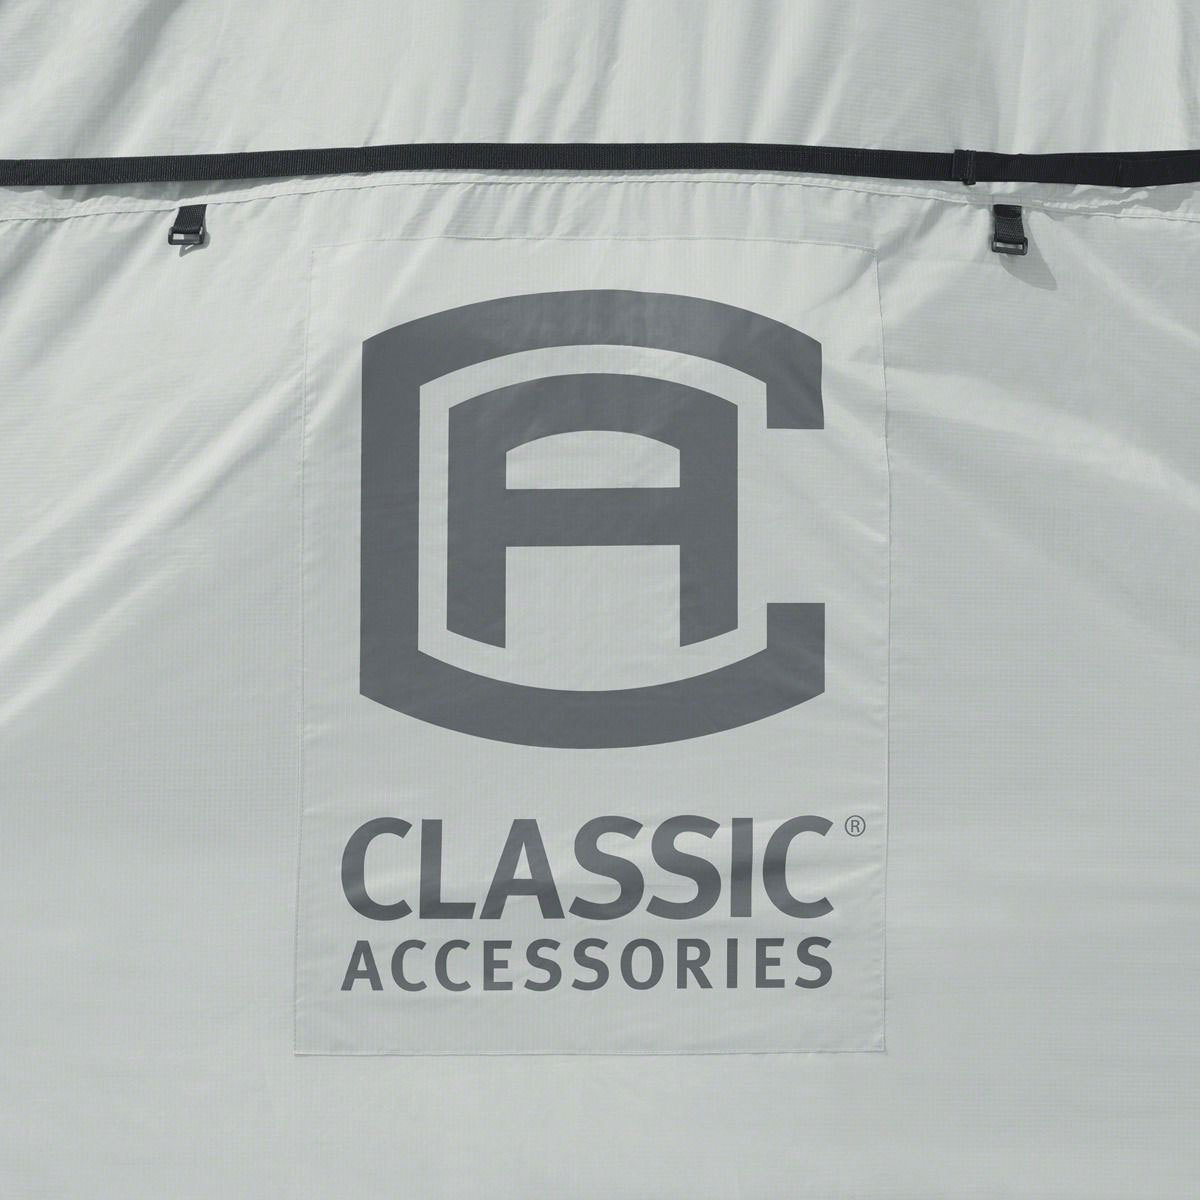 Classic Accessories Skyshield Motorhome Cover in 3 Sizes - Signature Retail Stores